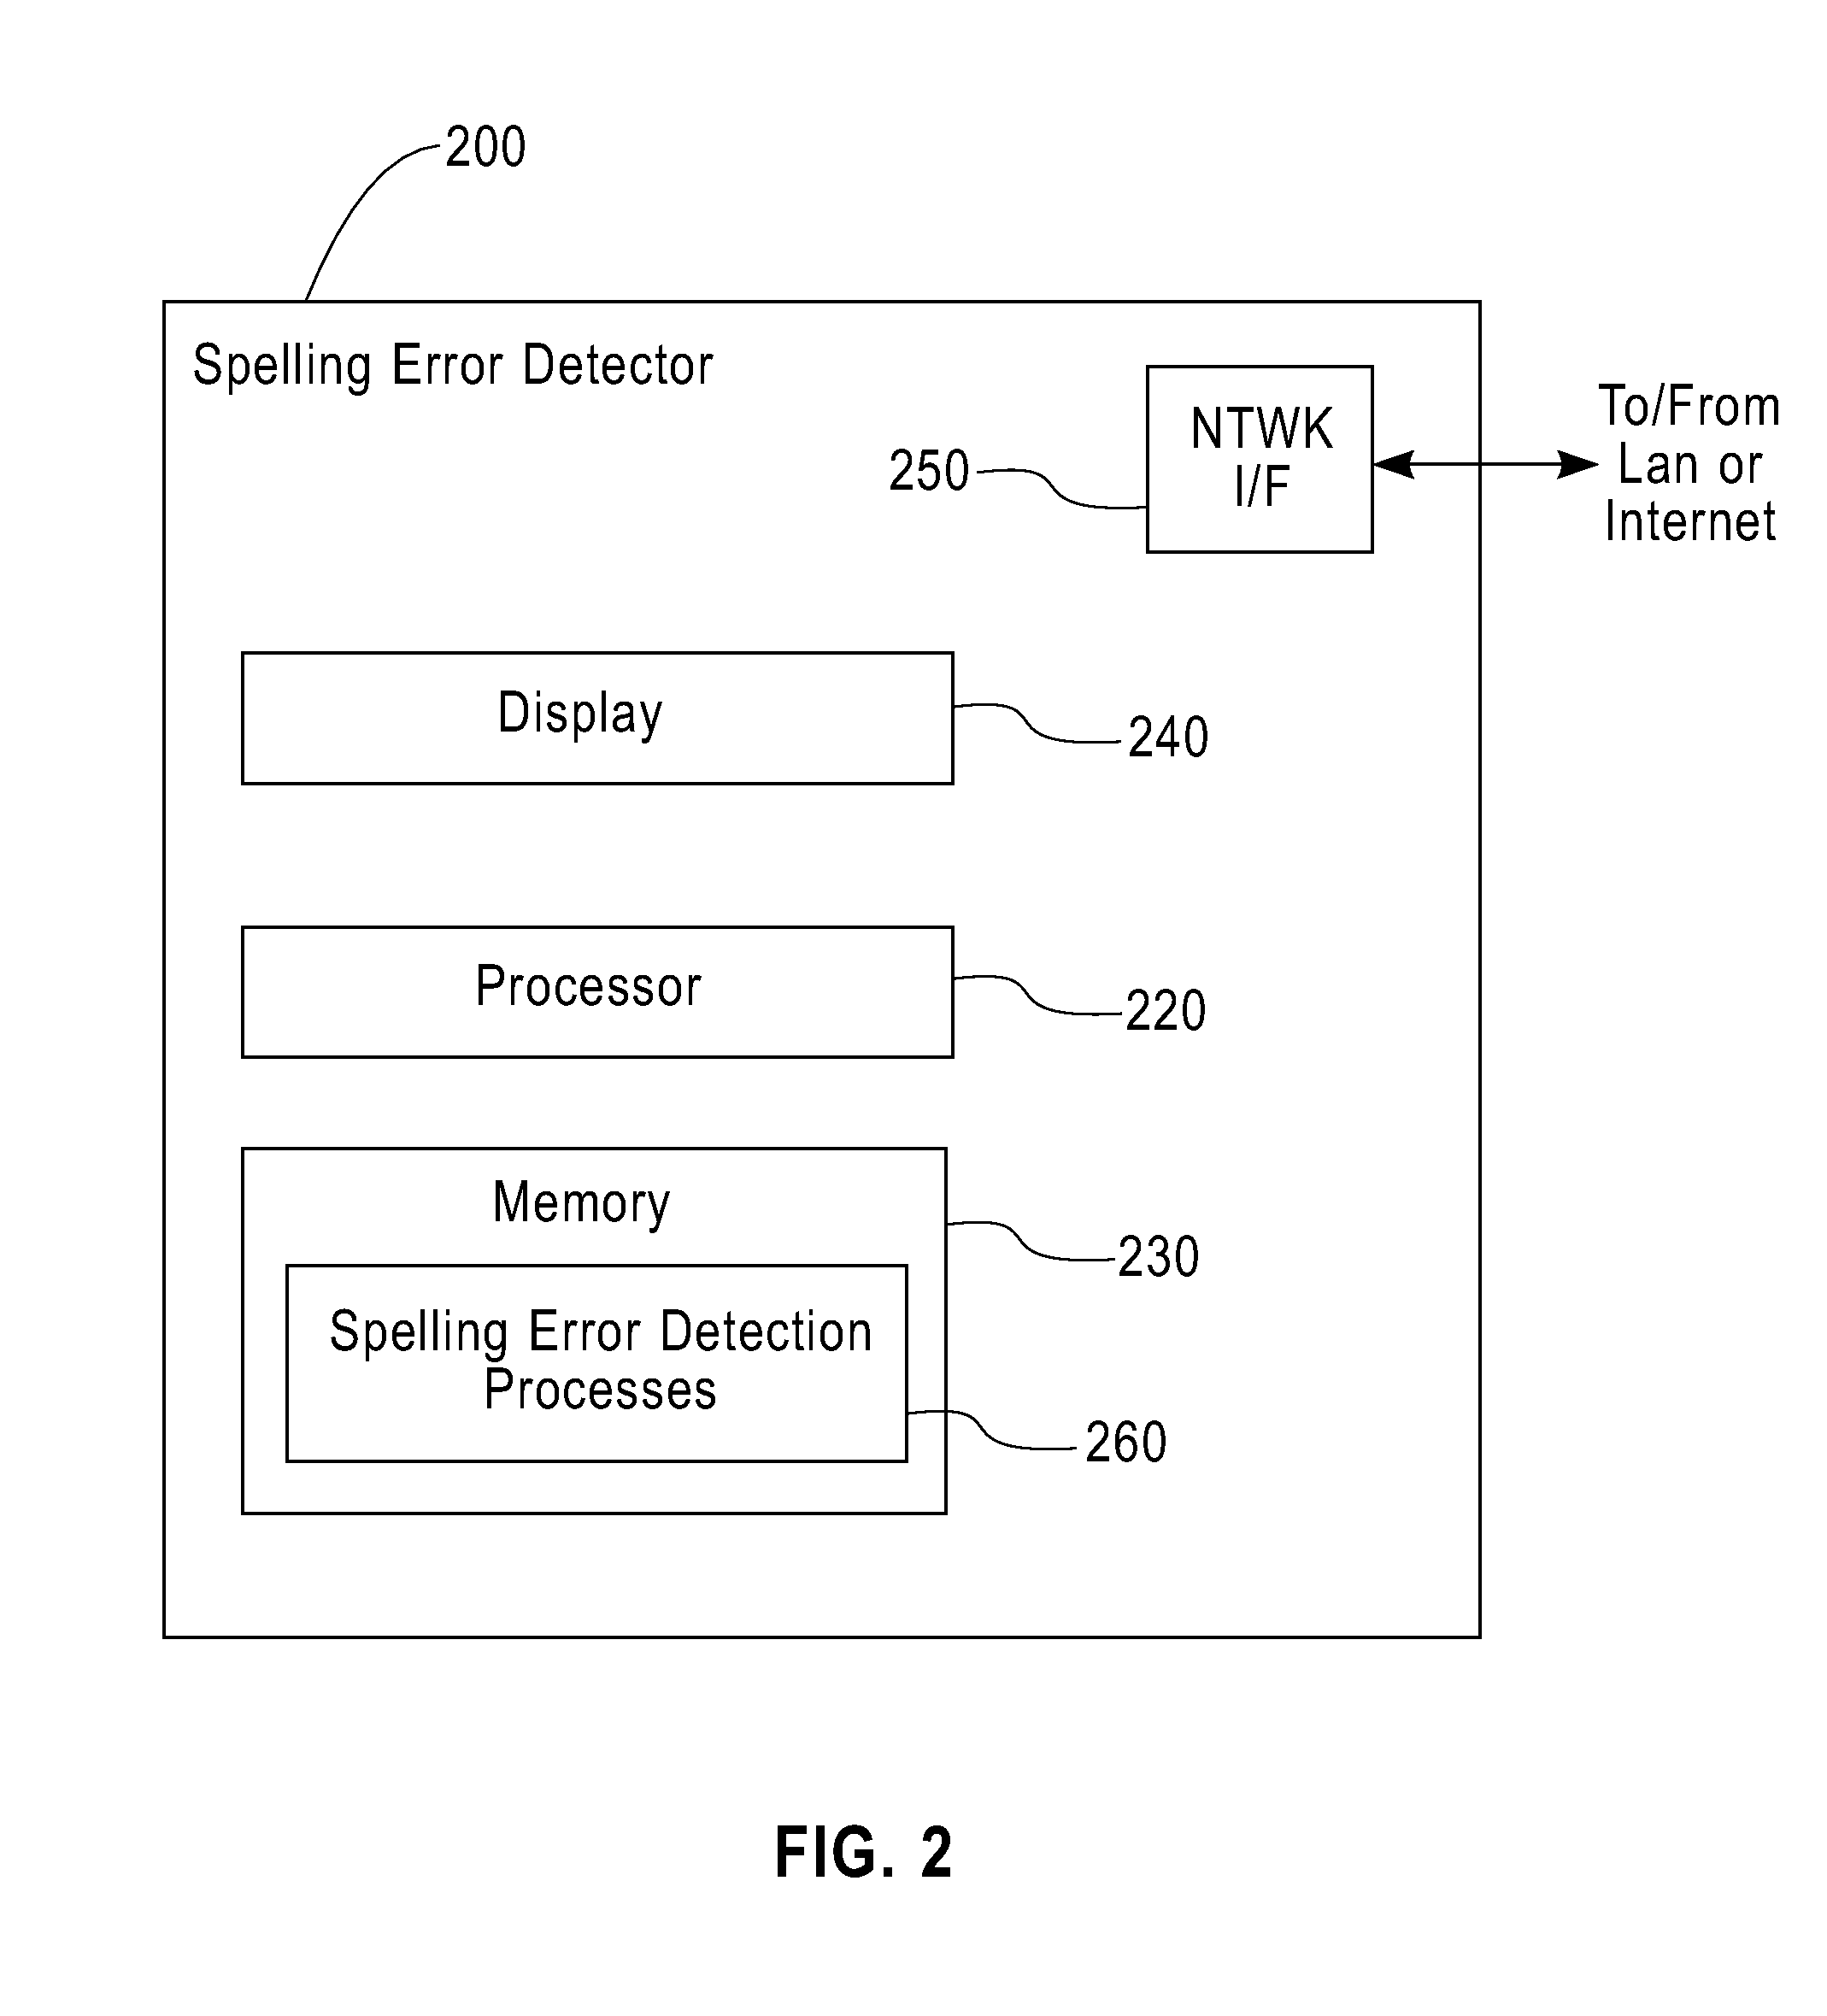 Method and Apparatus for Automatic Detection of Spelling Errors in One or More Documents